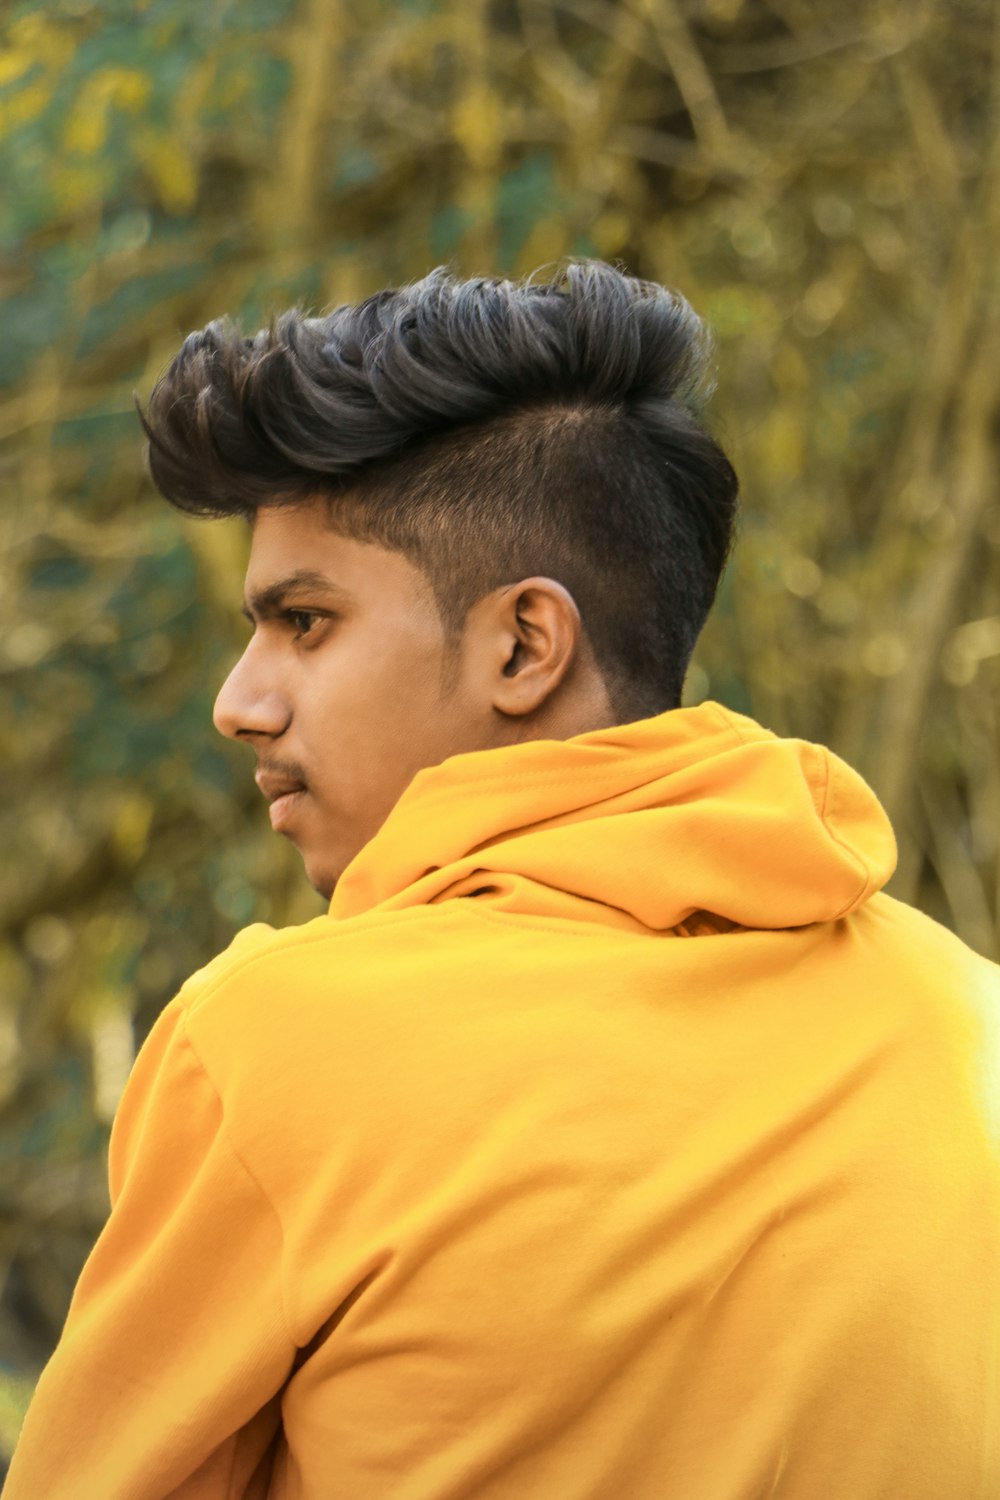 1K+ Fade Haircut Pictures | Download Free Images on Unsplash